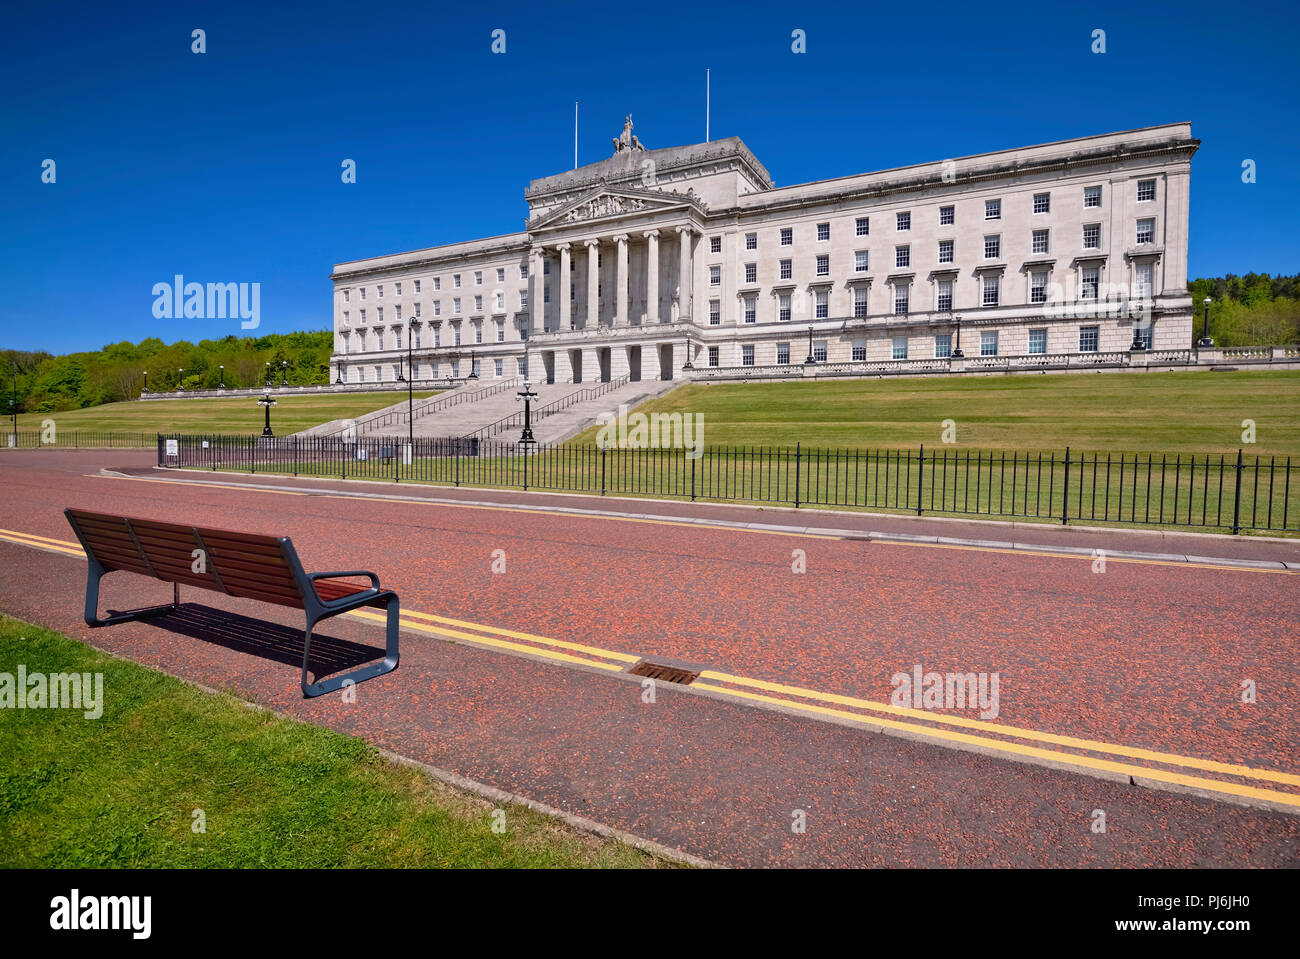 Northern Ireland, Belfast, Stormont, Parliament or Northern Ireland Assembly Buildings with double yellow lines and seat on roadway in the foreground. Stock Photo